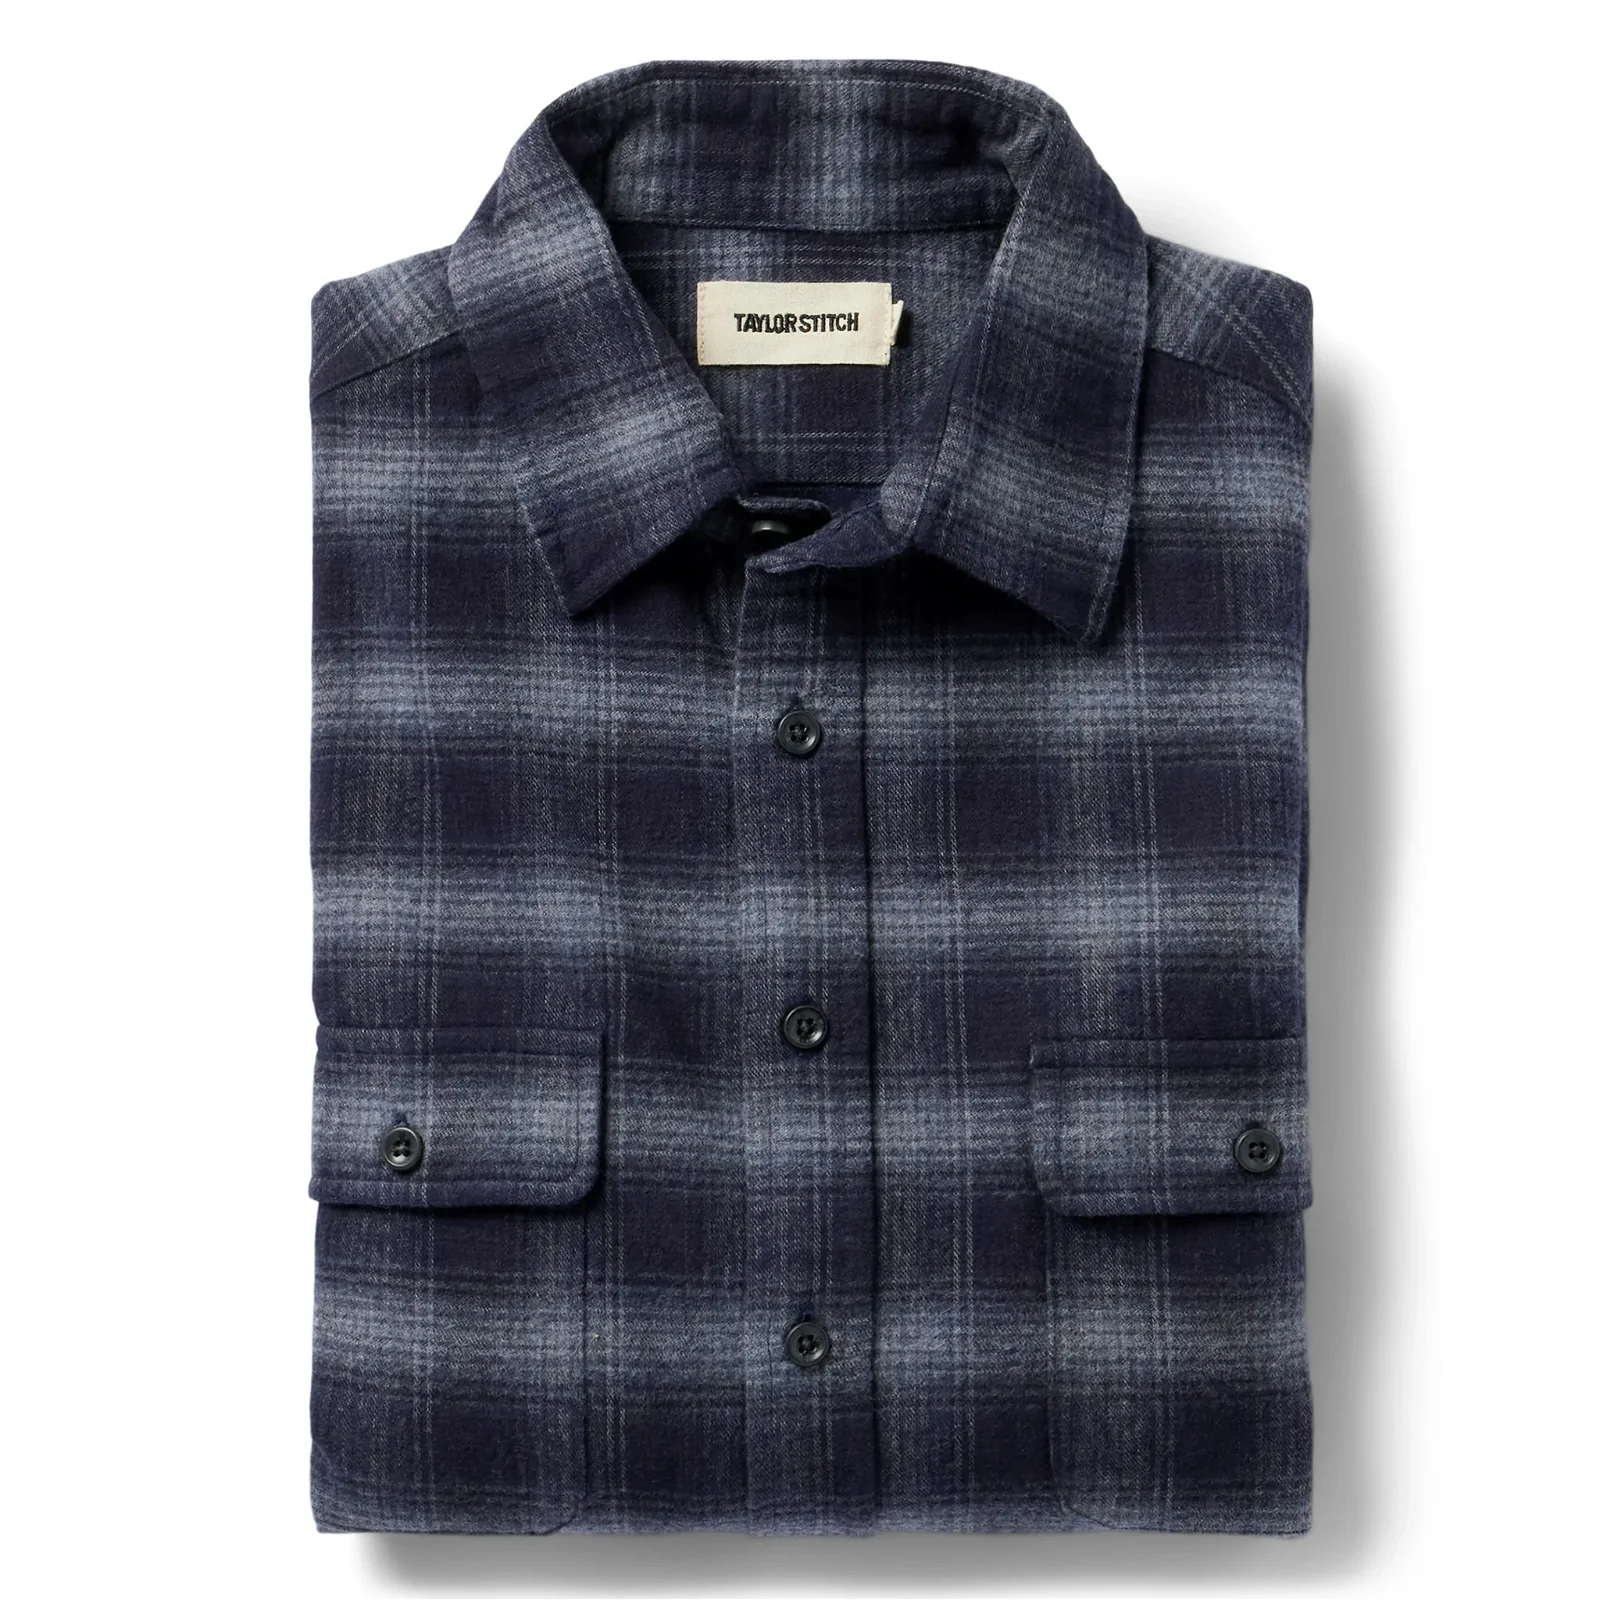 Image of The Yosemite Shirt in Navy Shadow Plaid